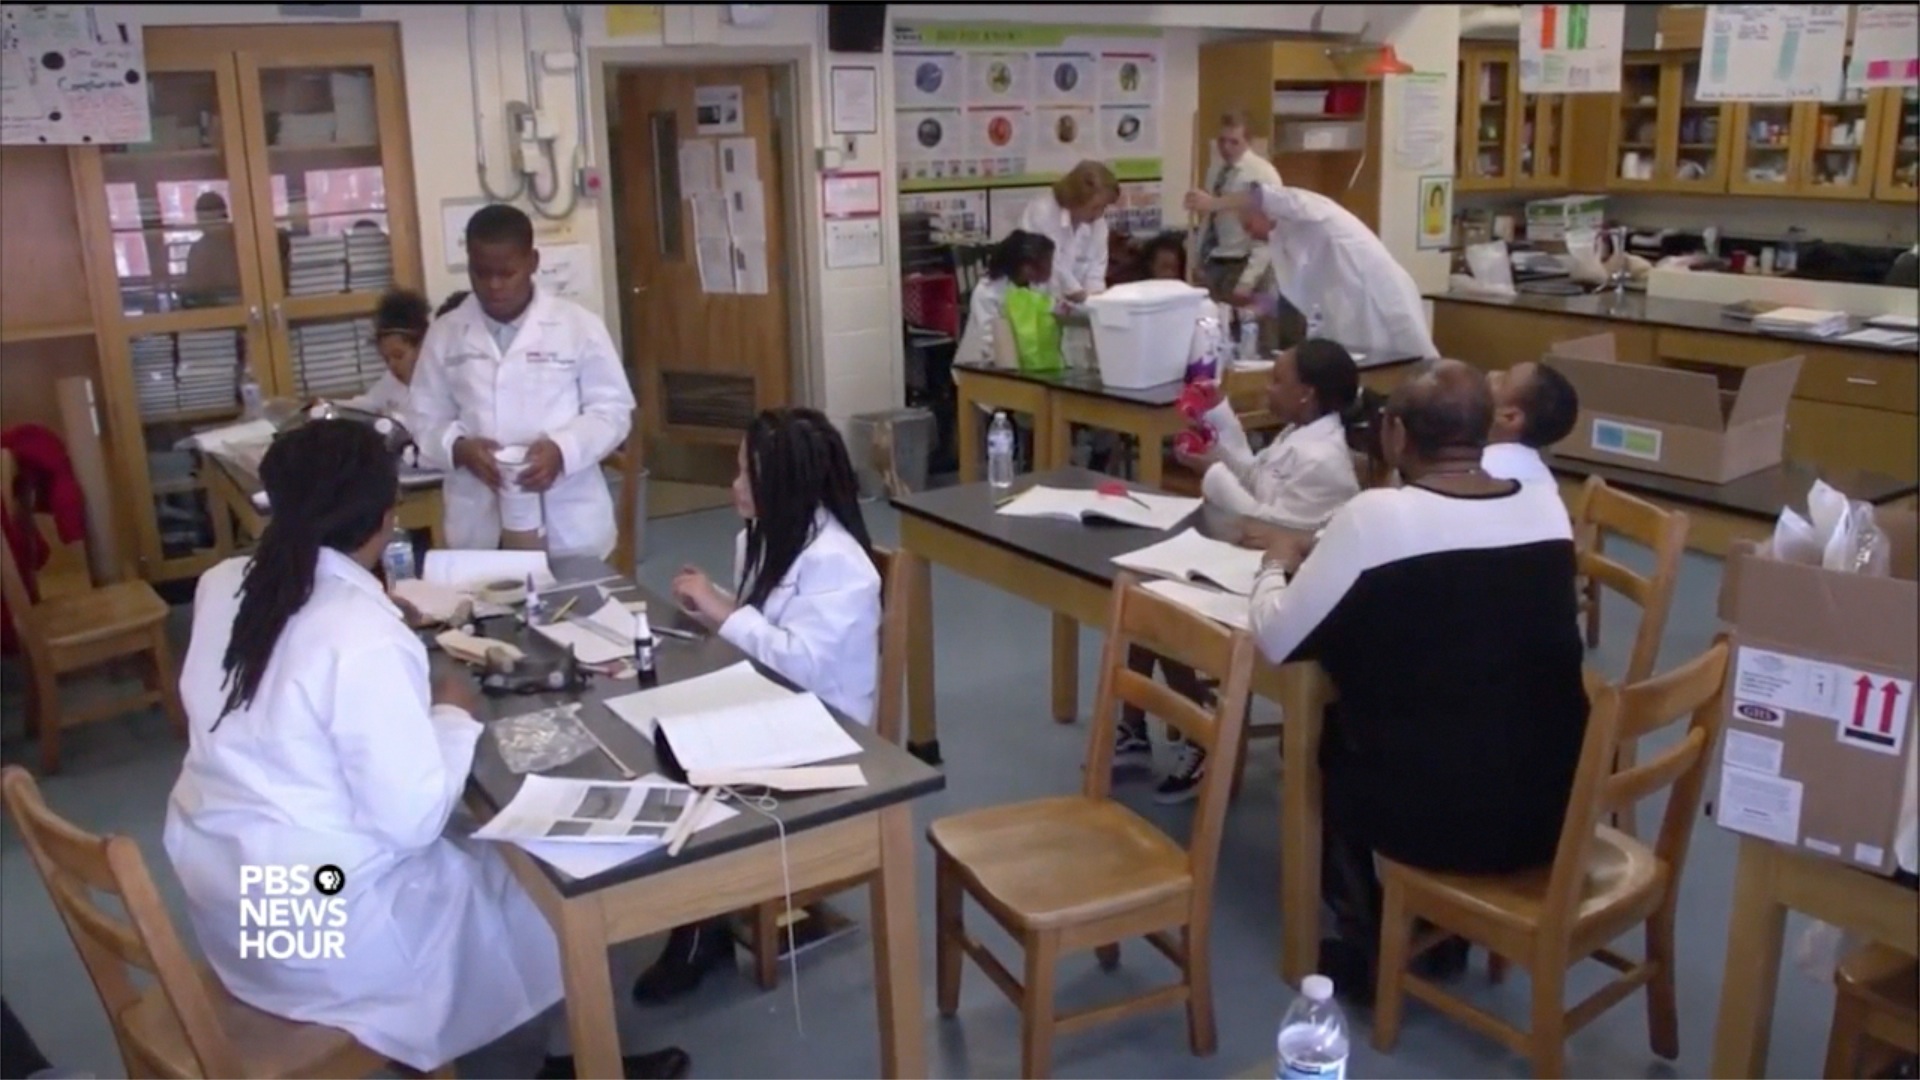 CURE Scholars at Franklin Square Elementary/Middle School work on science projects as shown in a video report by PBS NewsHour. Core team members for the CURE Scholars Program include Brian Sturdivant, MSW, far left, and Executive Director Robin Saunders, EdD, MS, mentoring a student at a table, far right.  